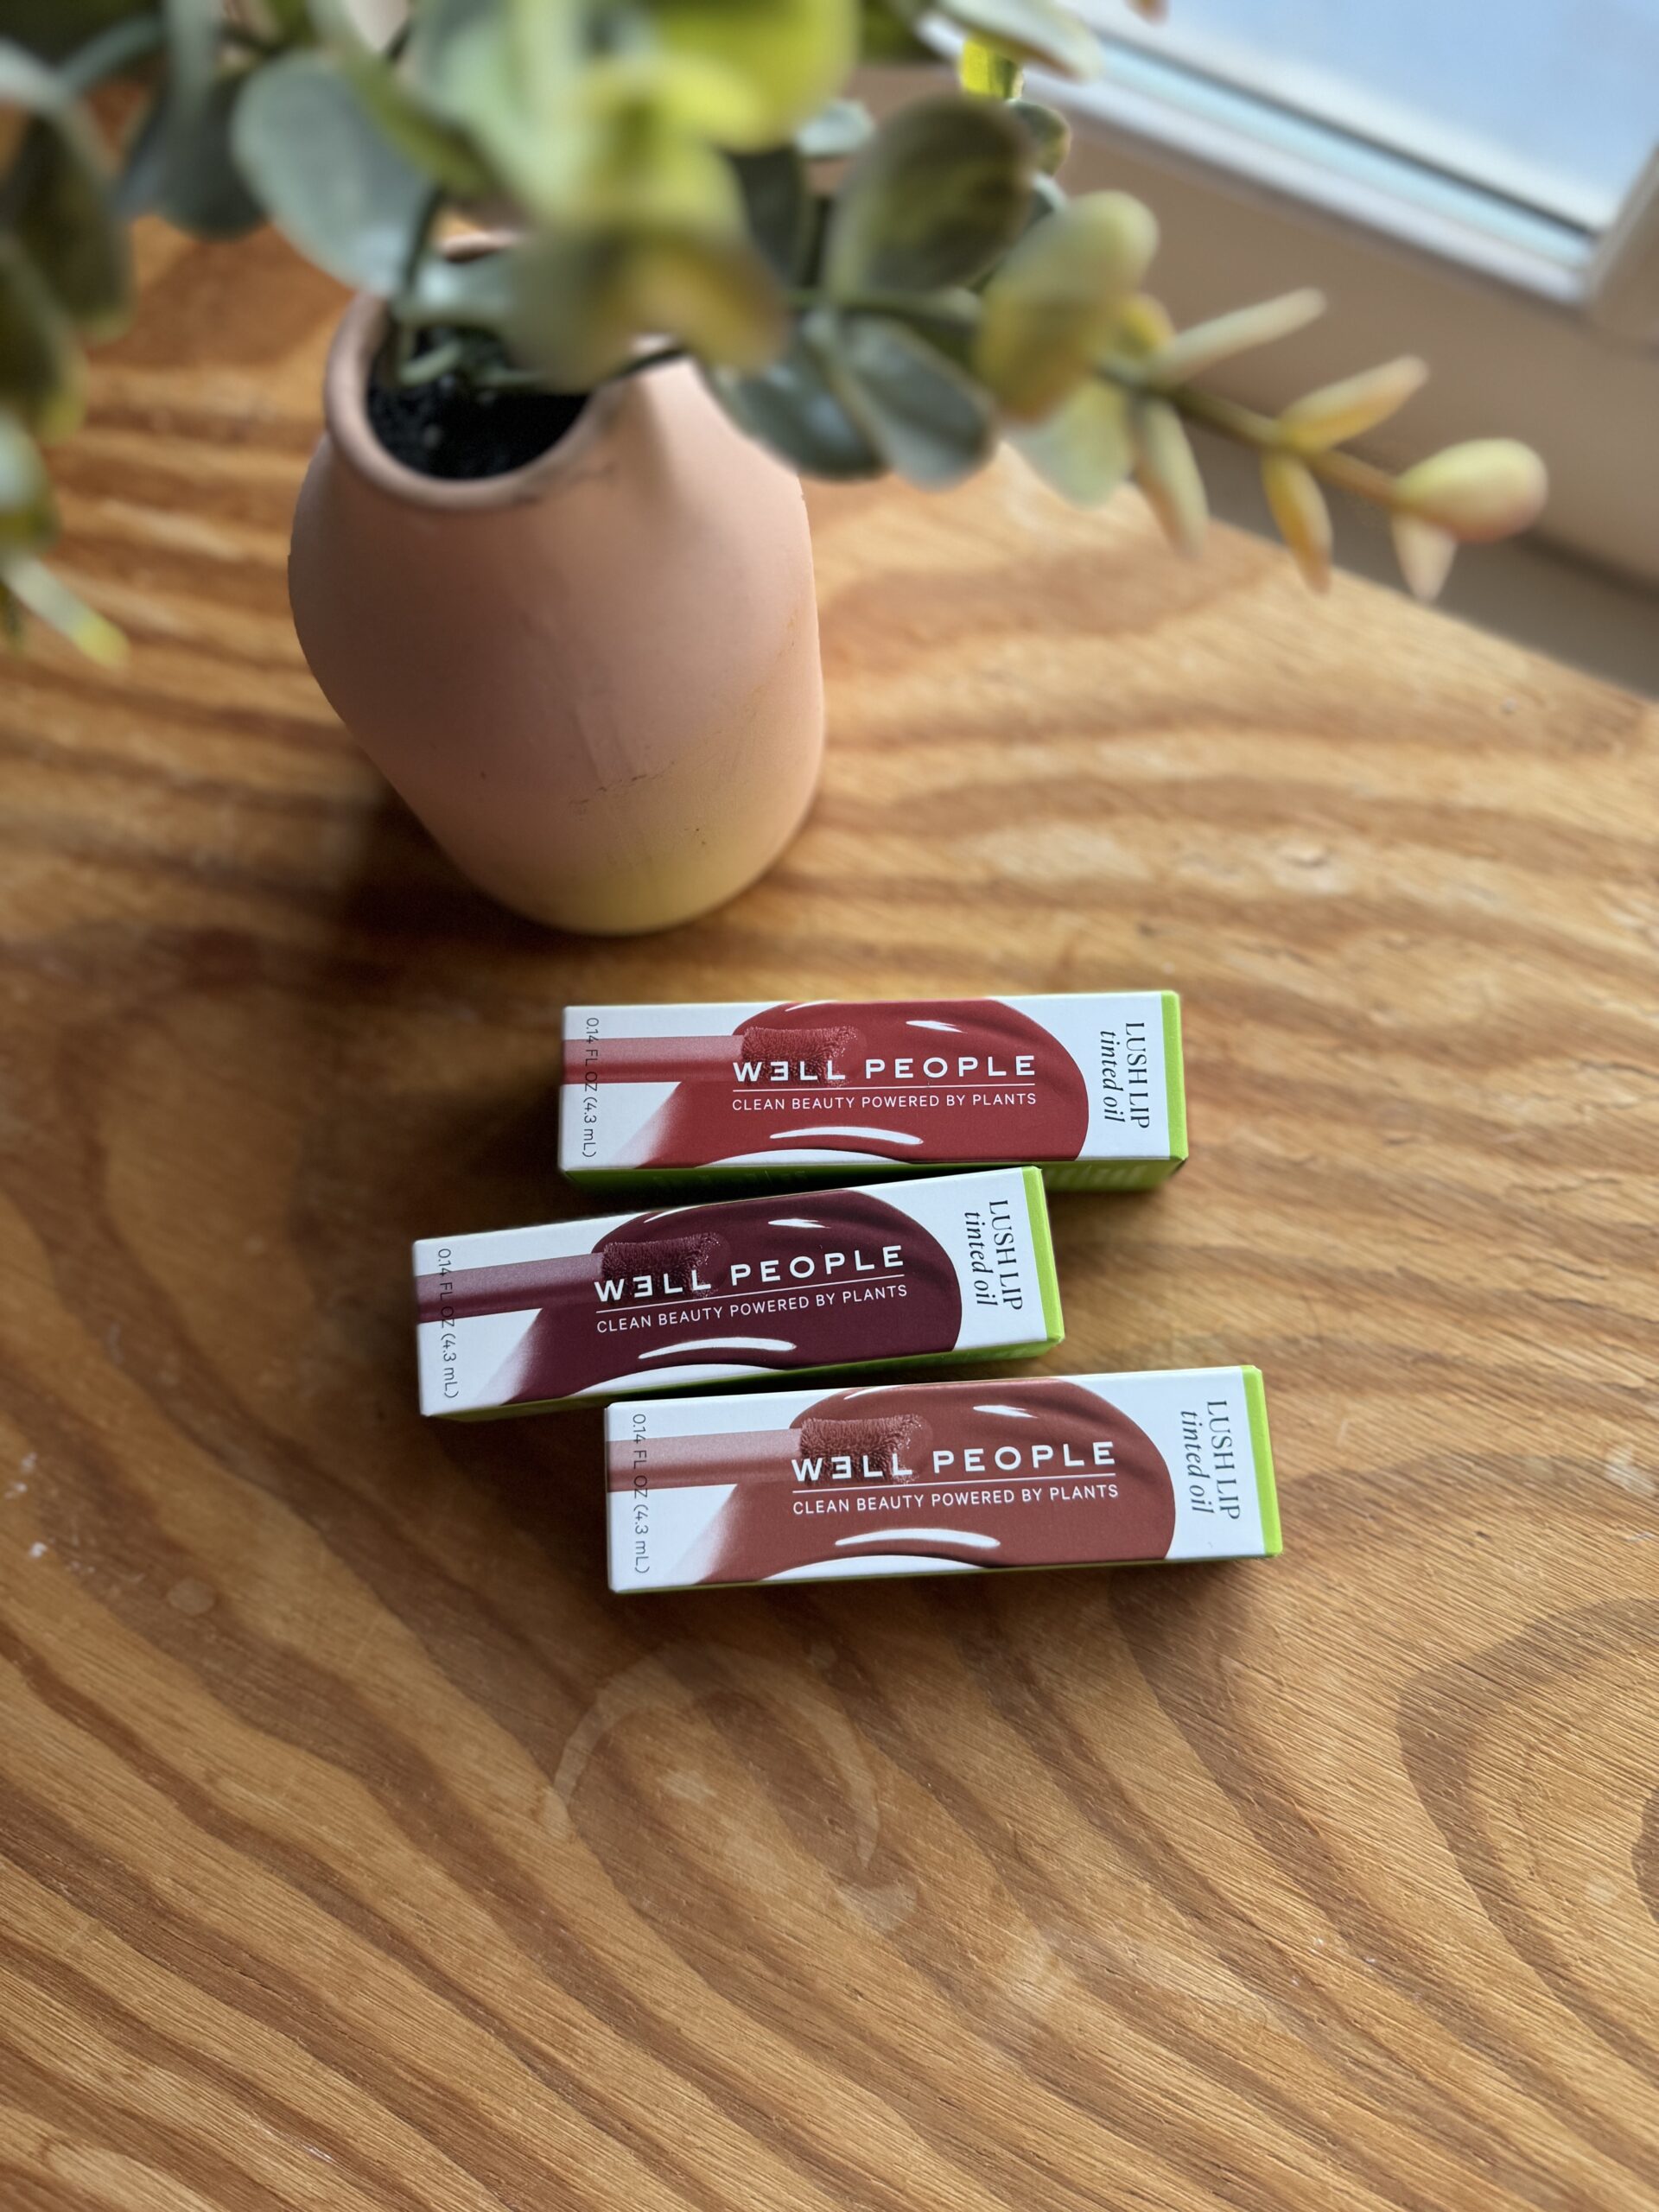 Three tubes of lip balm sitting on a wooden table.